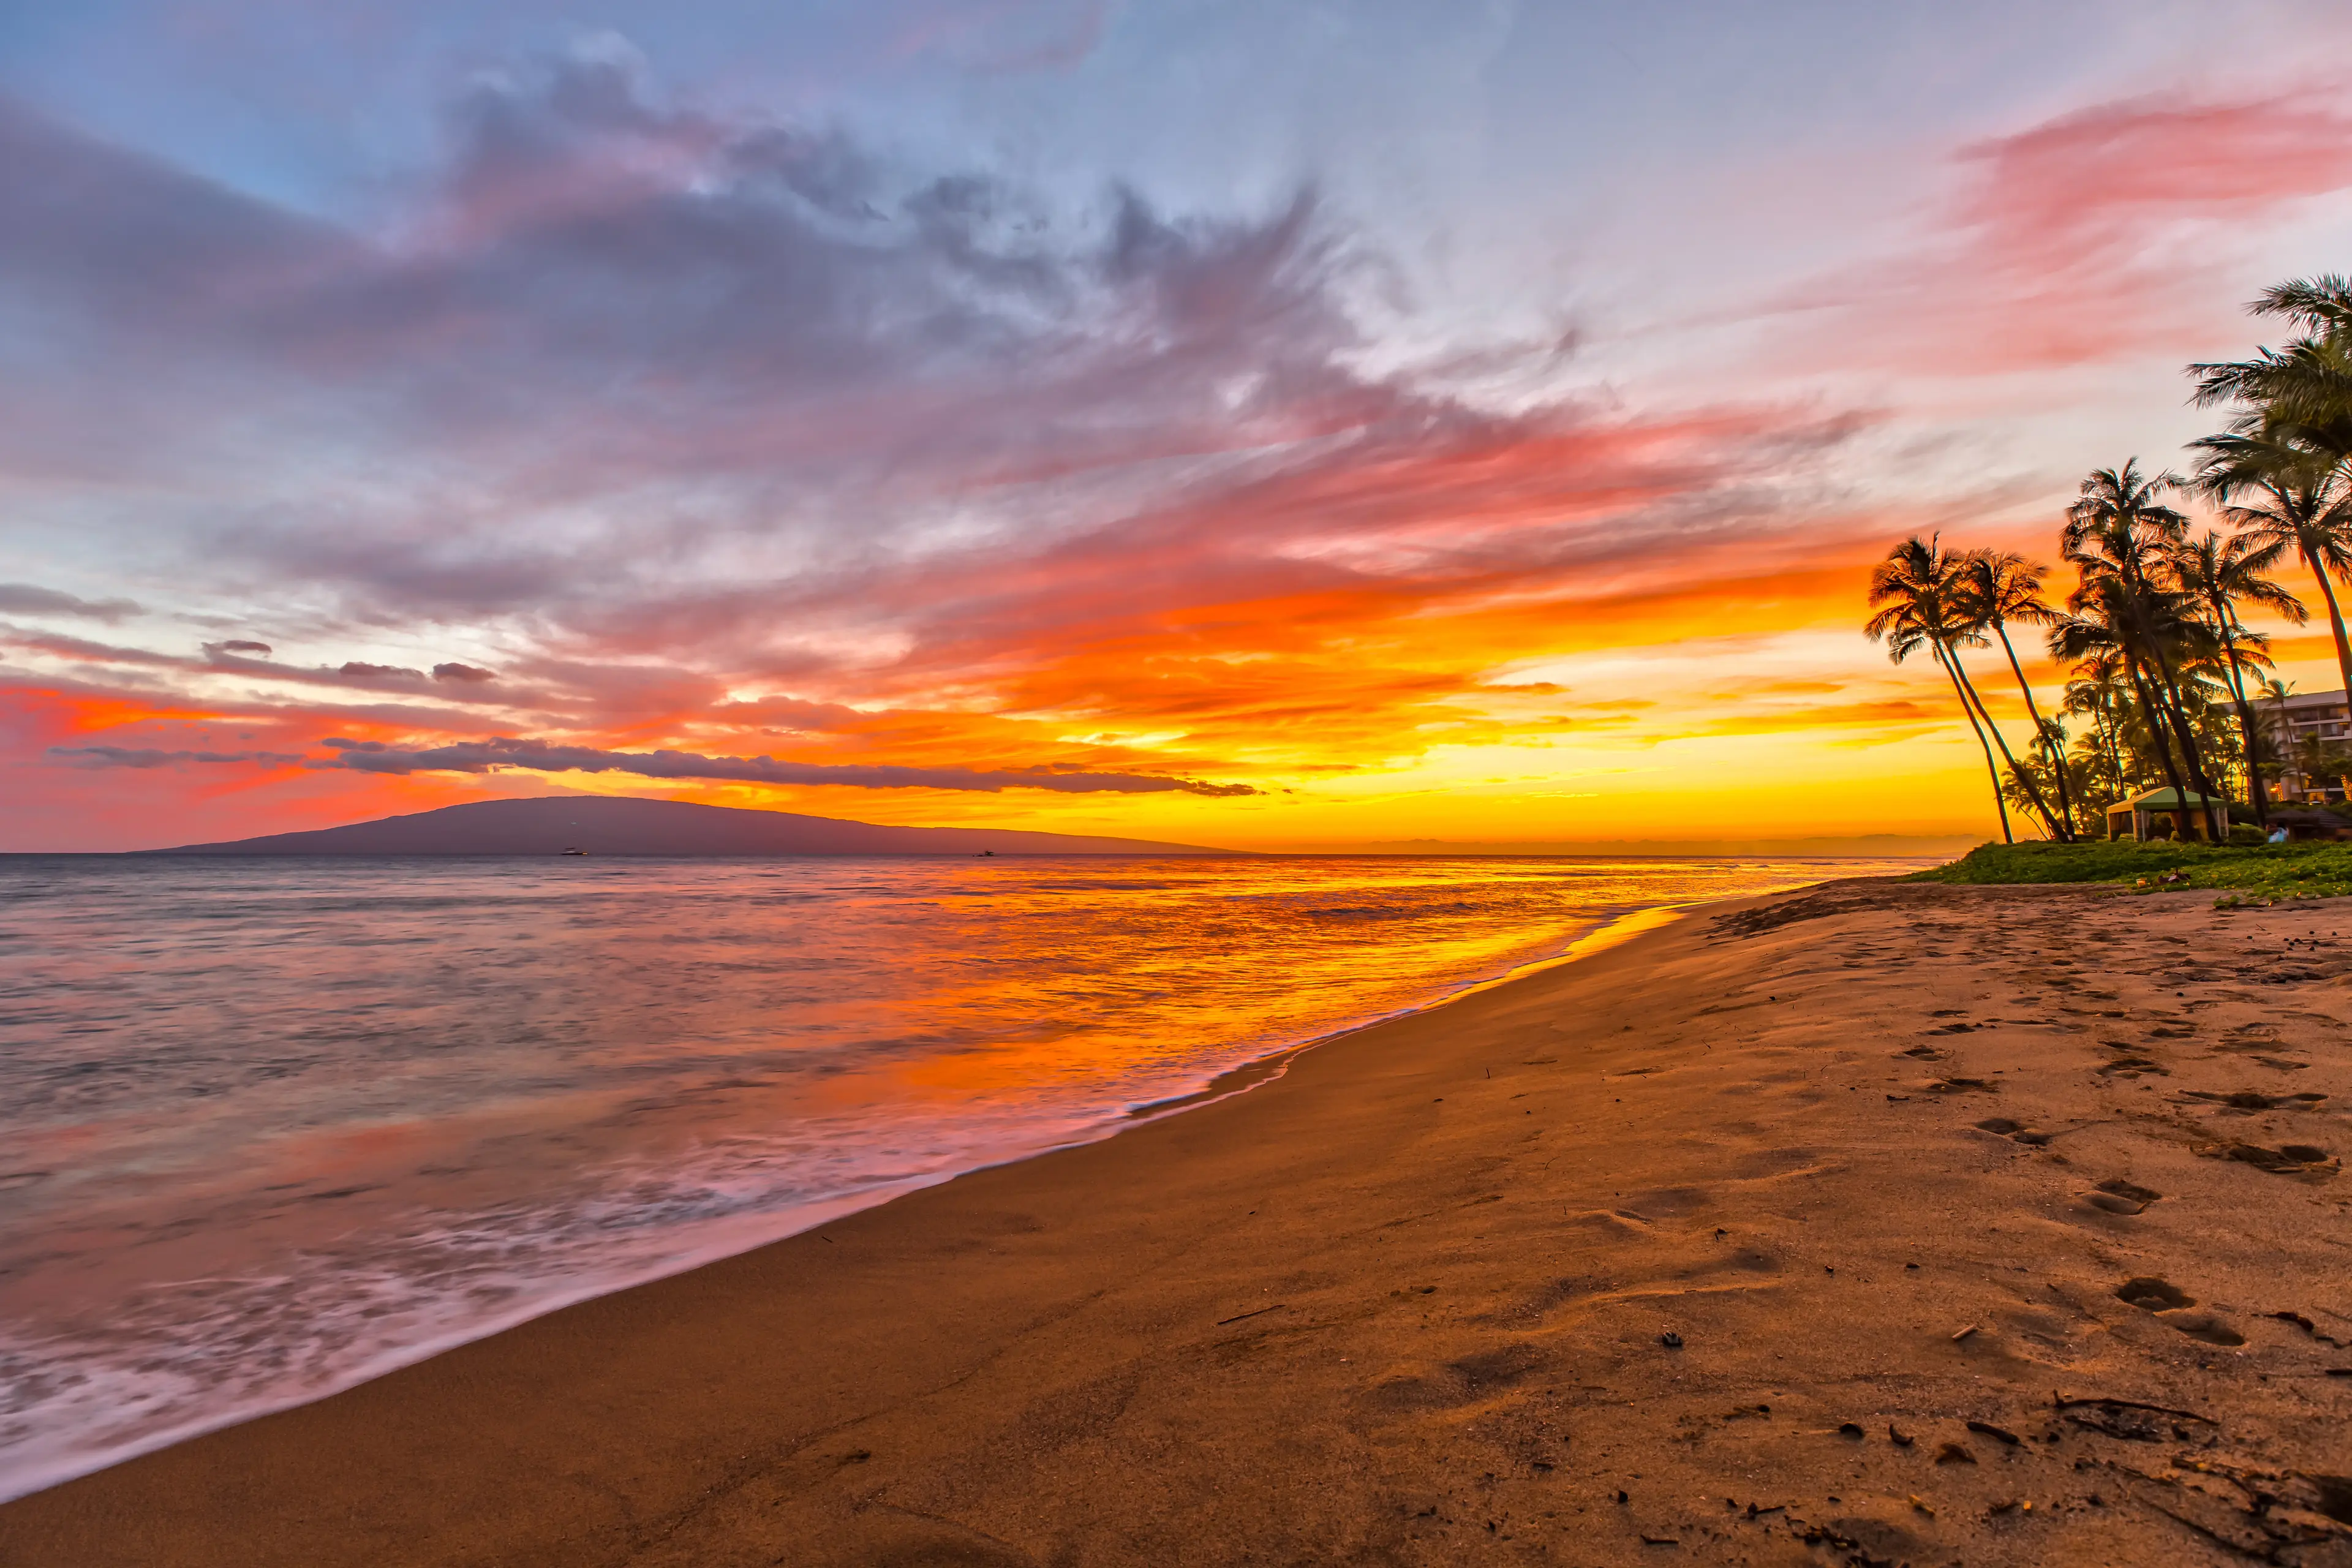 5-Day Solo Adventure: Maui's Nightlife and Excursions for Locals